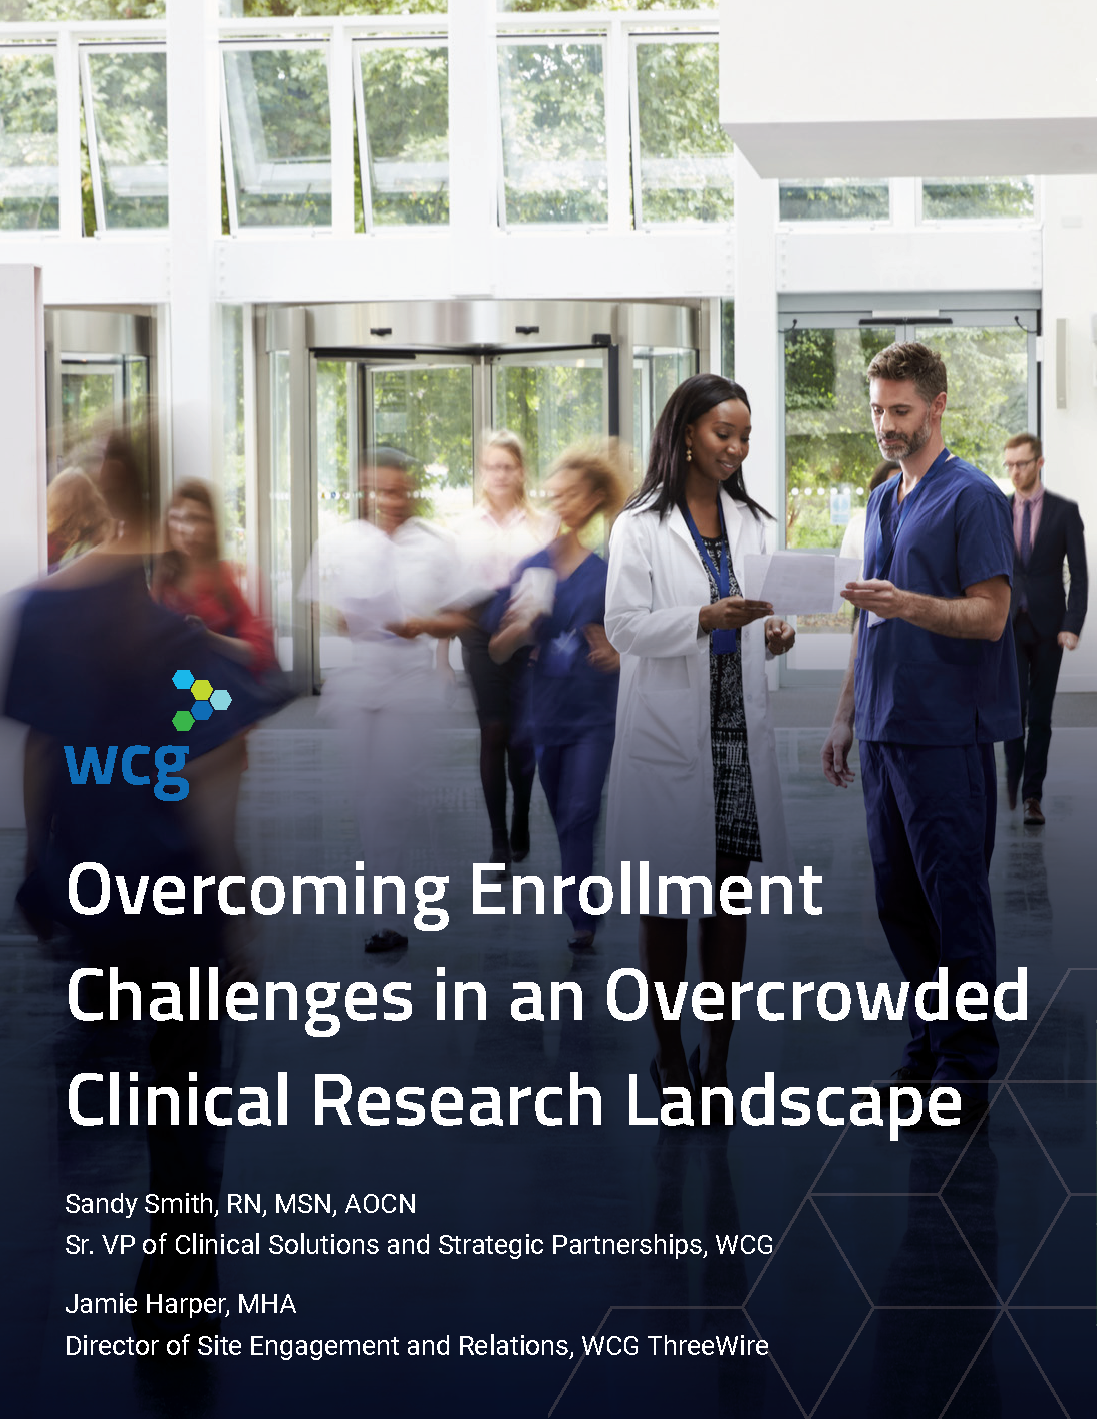 
Overcoming Enrollment Challenges in an Overcrowded Clinical Research Landscape